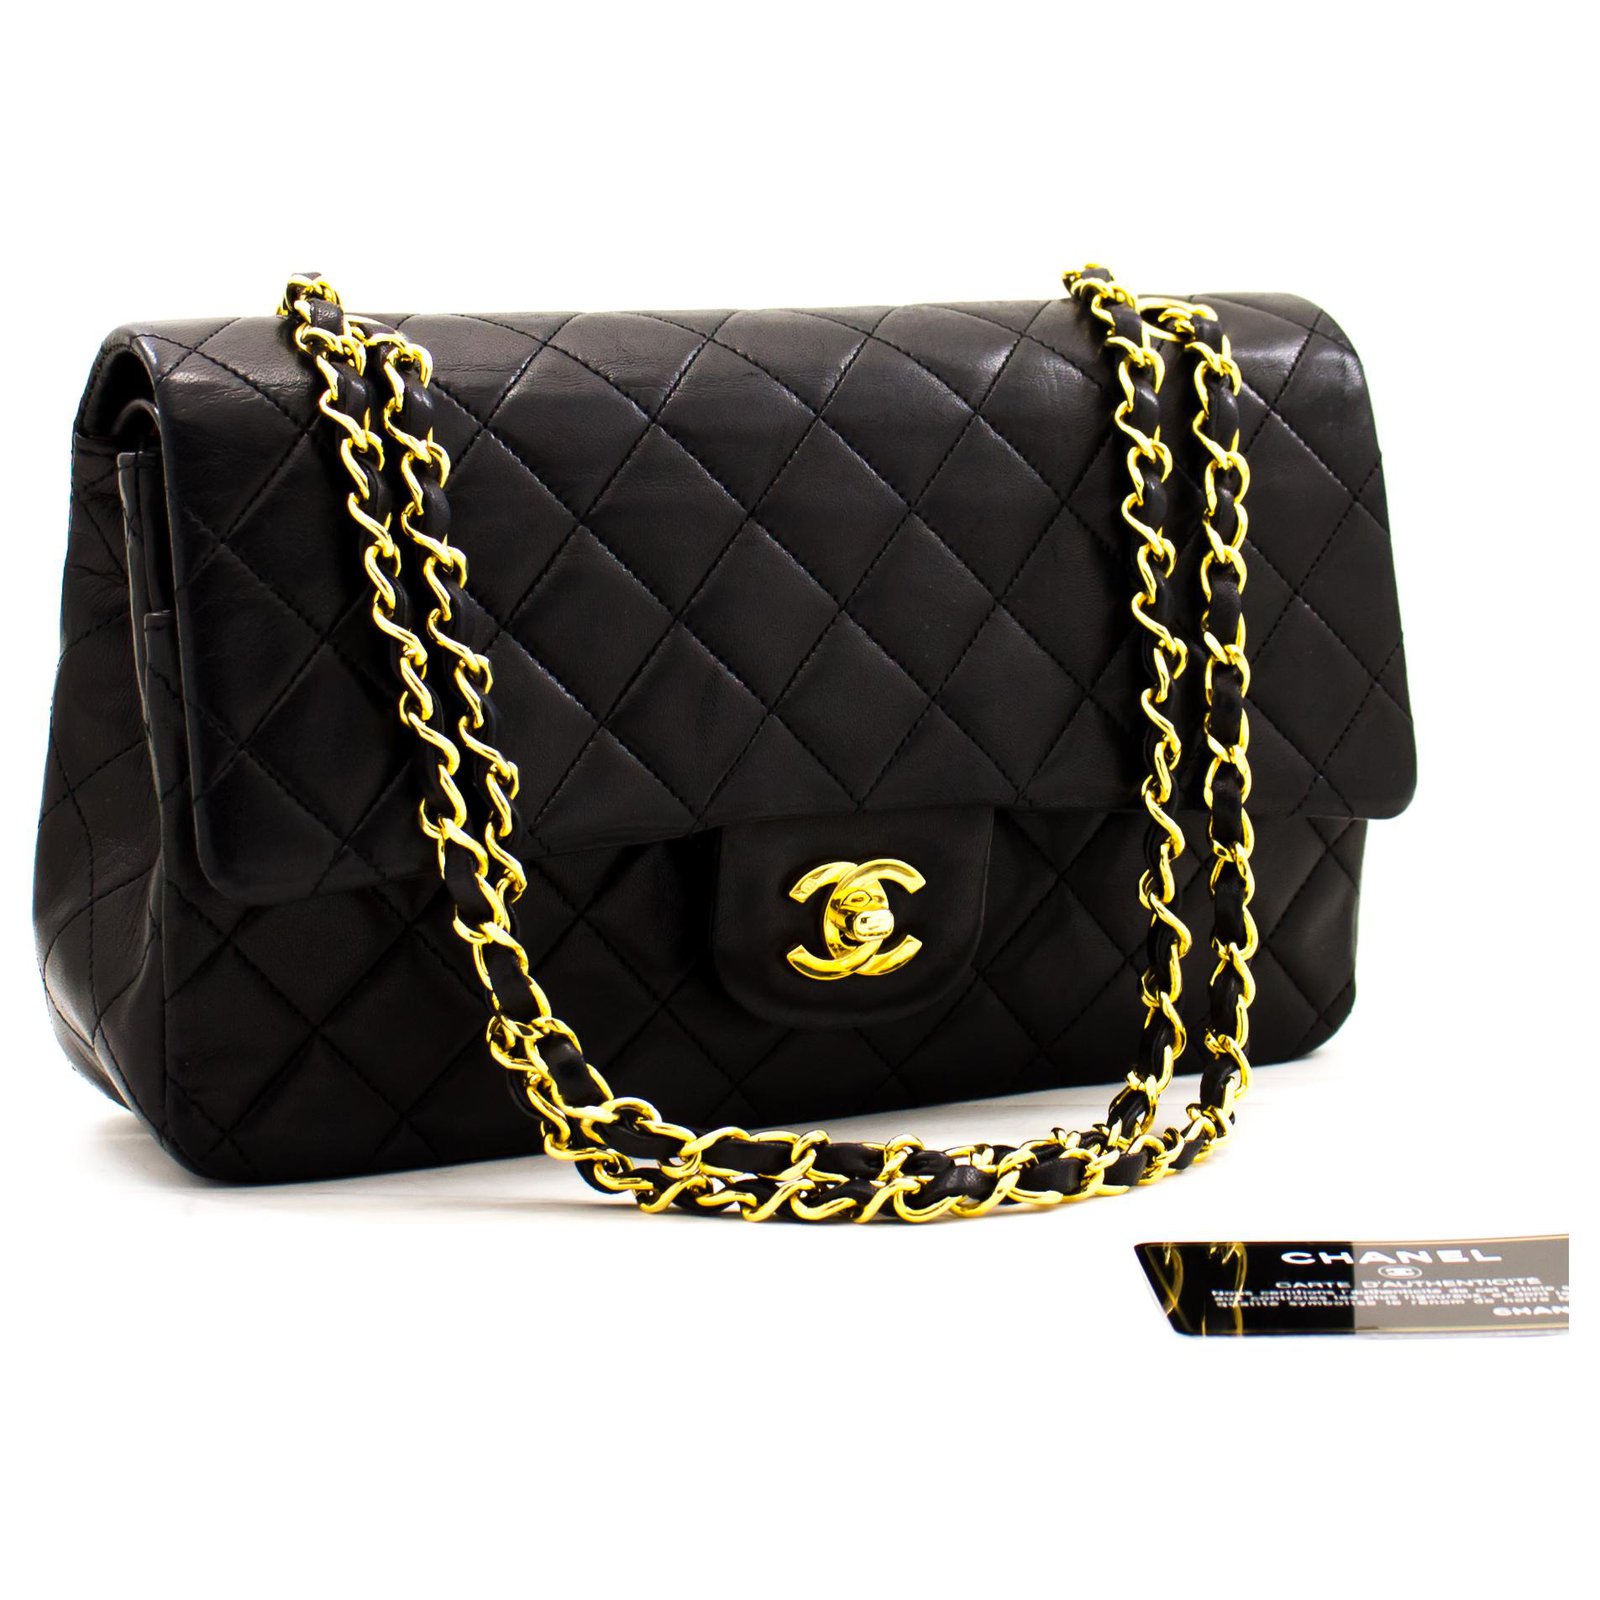 Chanel 2.55 lined flap 10